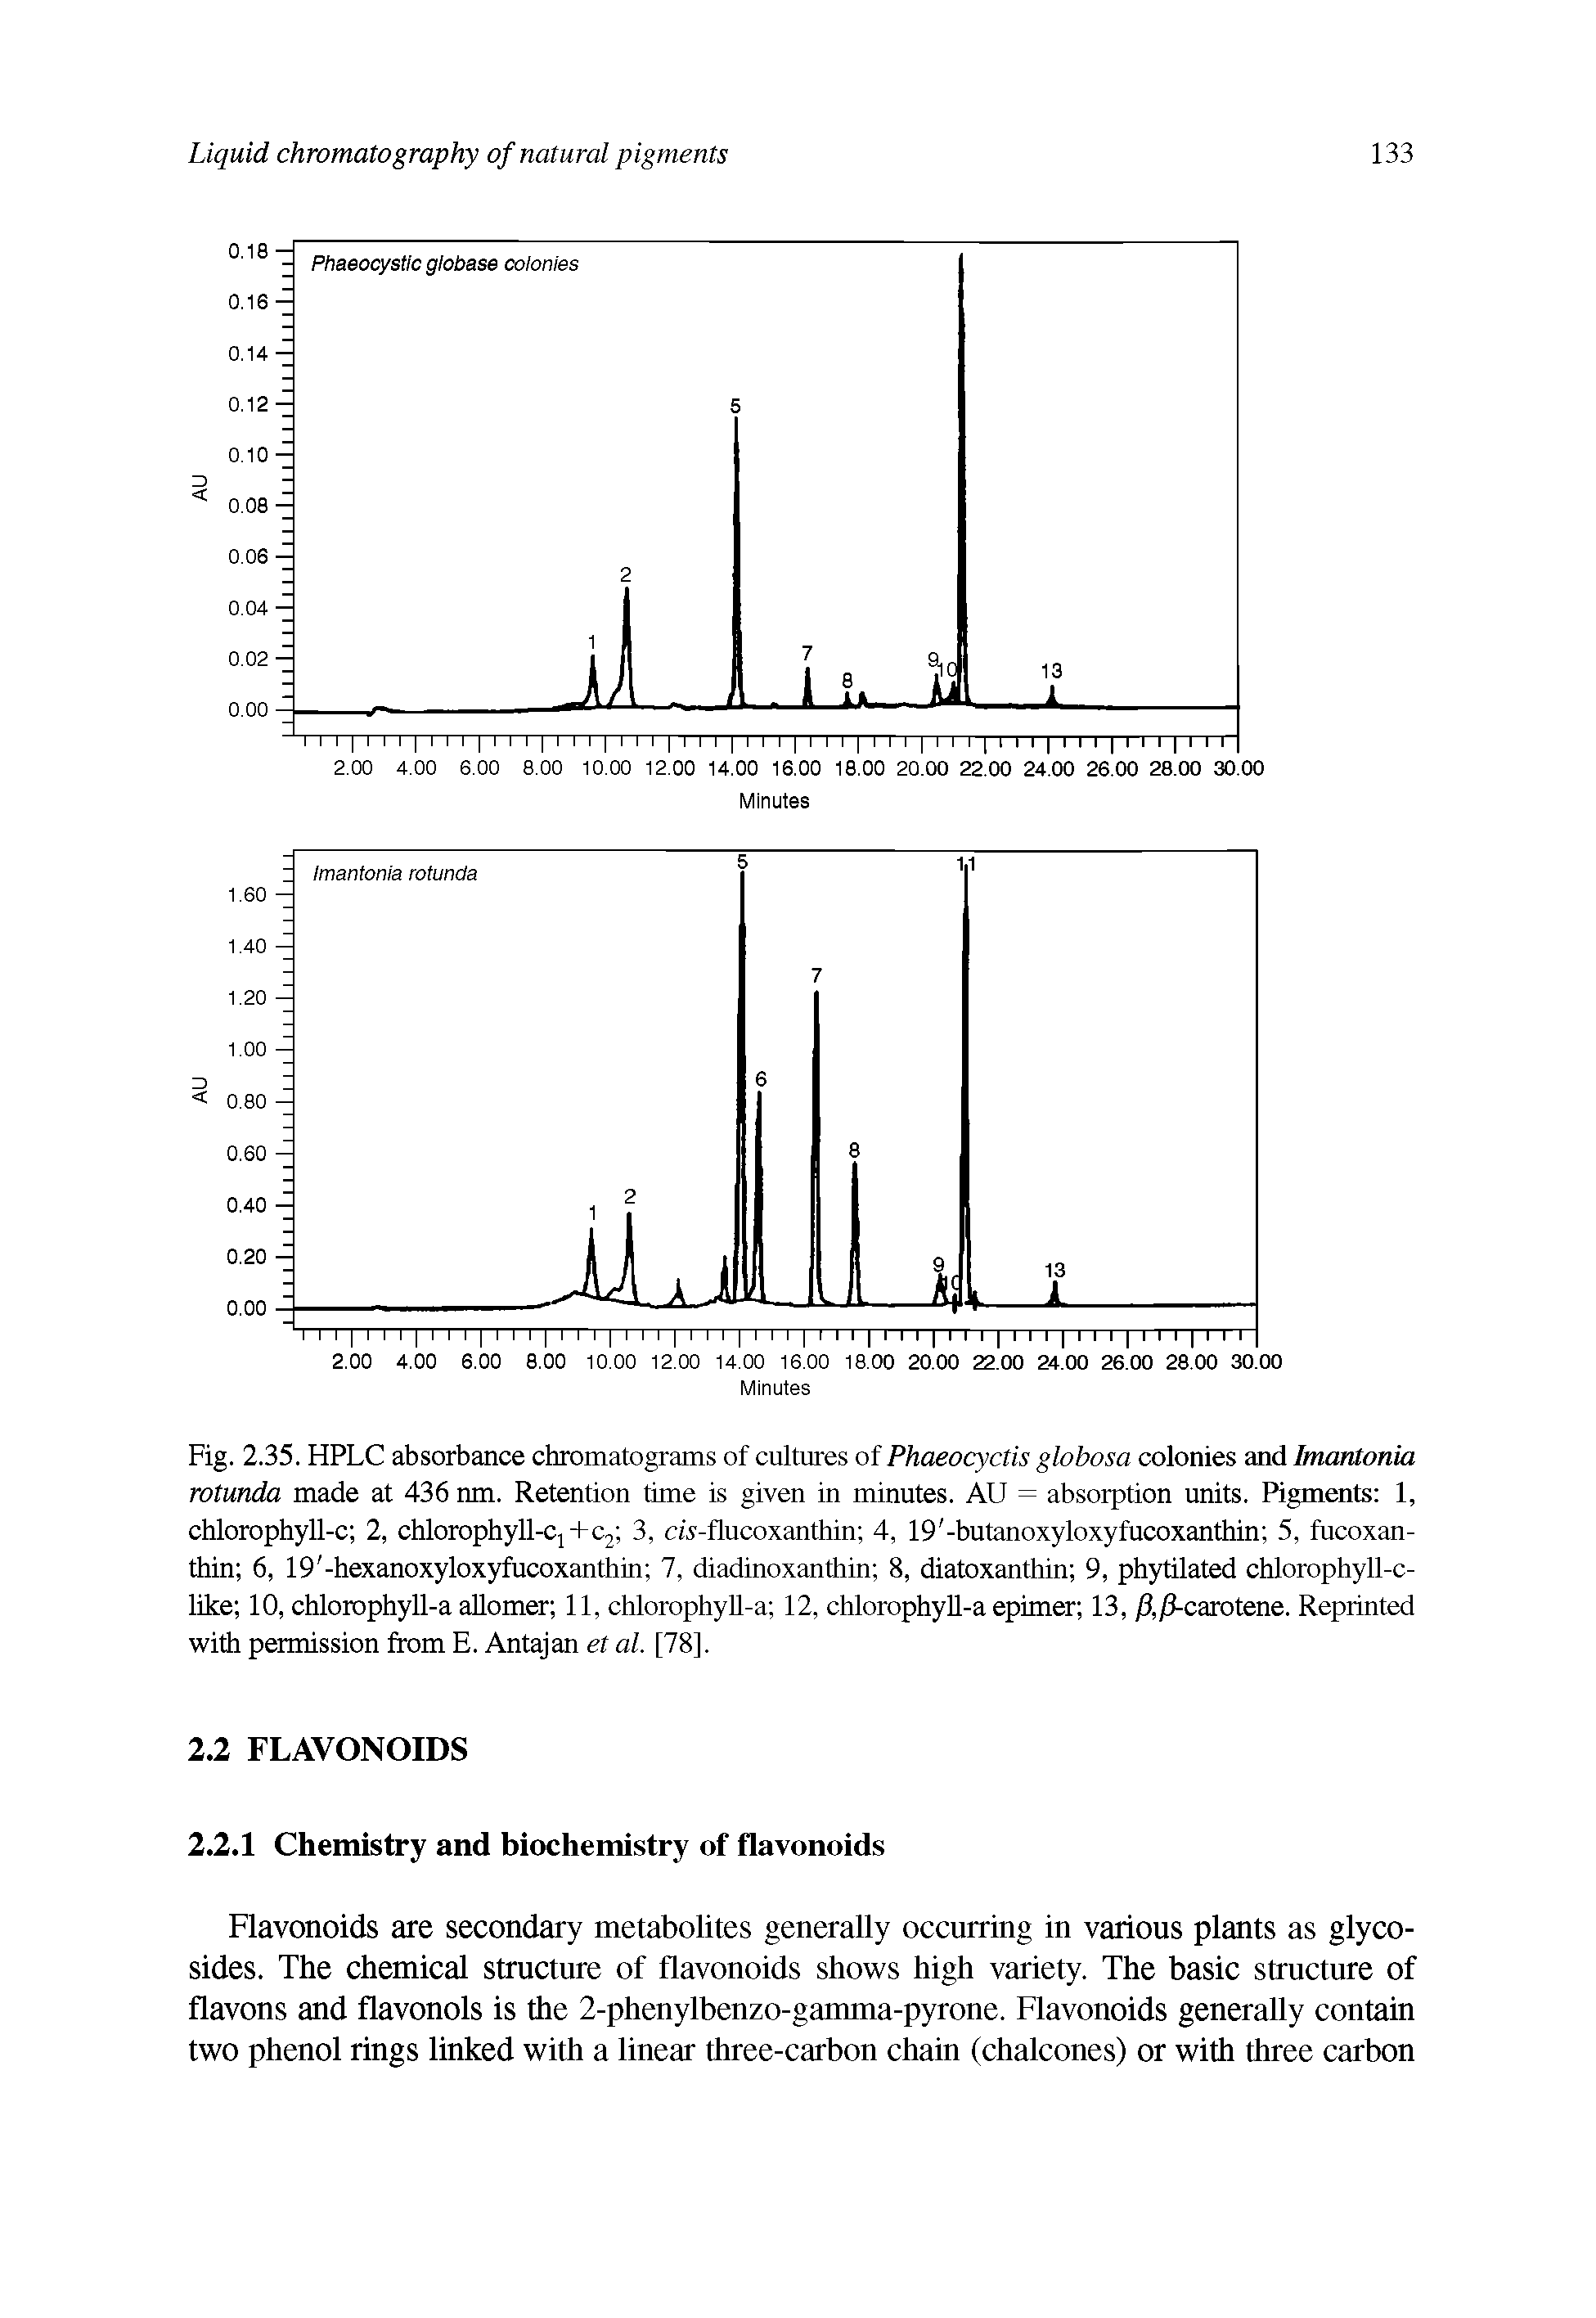 Fig. 2.35. HPLC absorbance chromatograms of cultures of Phaeocyctis globosa colonies and Imantonia rotunda made at 436 nm. Retention time is given in minutes. AU = absorption units. Pigments 1, chlorophyll-c 2, chlorophyll-Cj+c2 3, cw-flucoxanthin 4, 19 -butanoxyloxyfucoxanthin 5, fucoxan-thin 6, 19 -hexanoxyloxyfucoxanthin 7, diadinoxanthin 8, diatoxanthin 9, phytilated chlorophyll-elite 10, chlorophyll-a allomer 11, chlorophyll-a 12, chlorophyll-a epimer 13, / ,/ -carotene. Reprinted with permission from E. Antajan et al. [78].